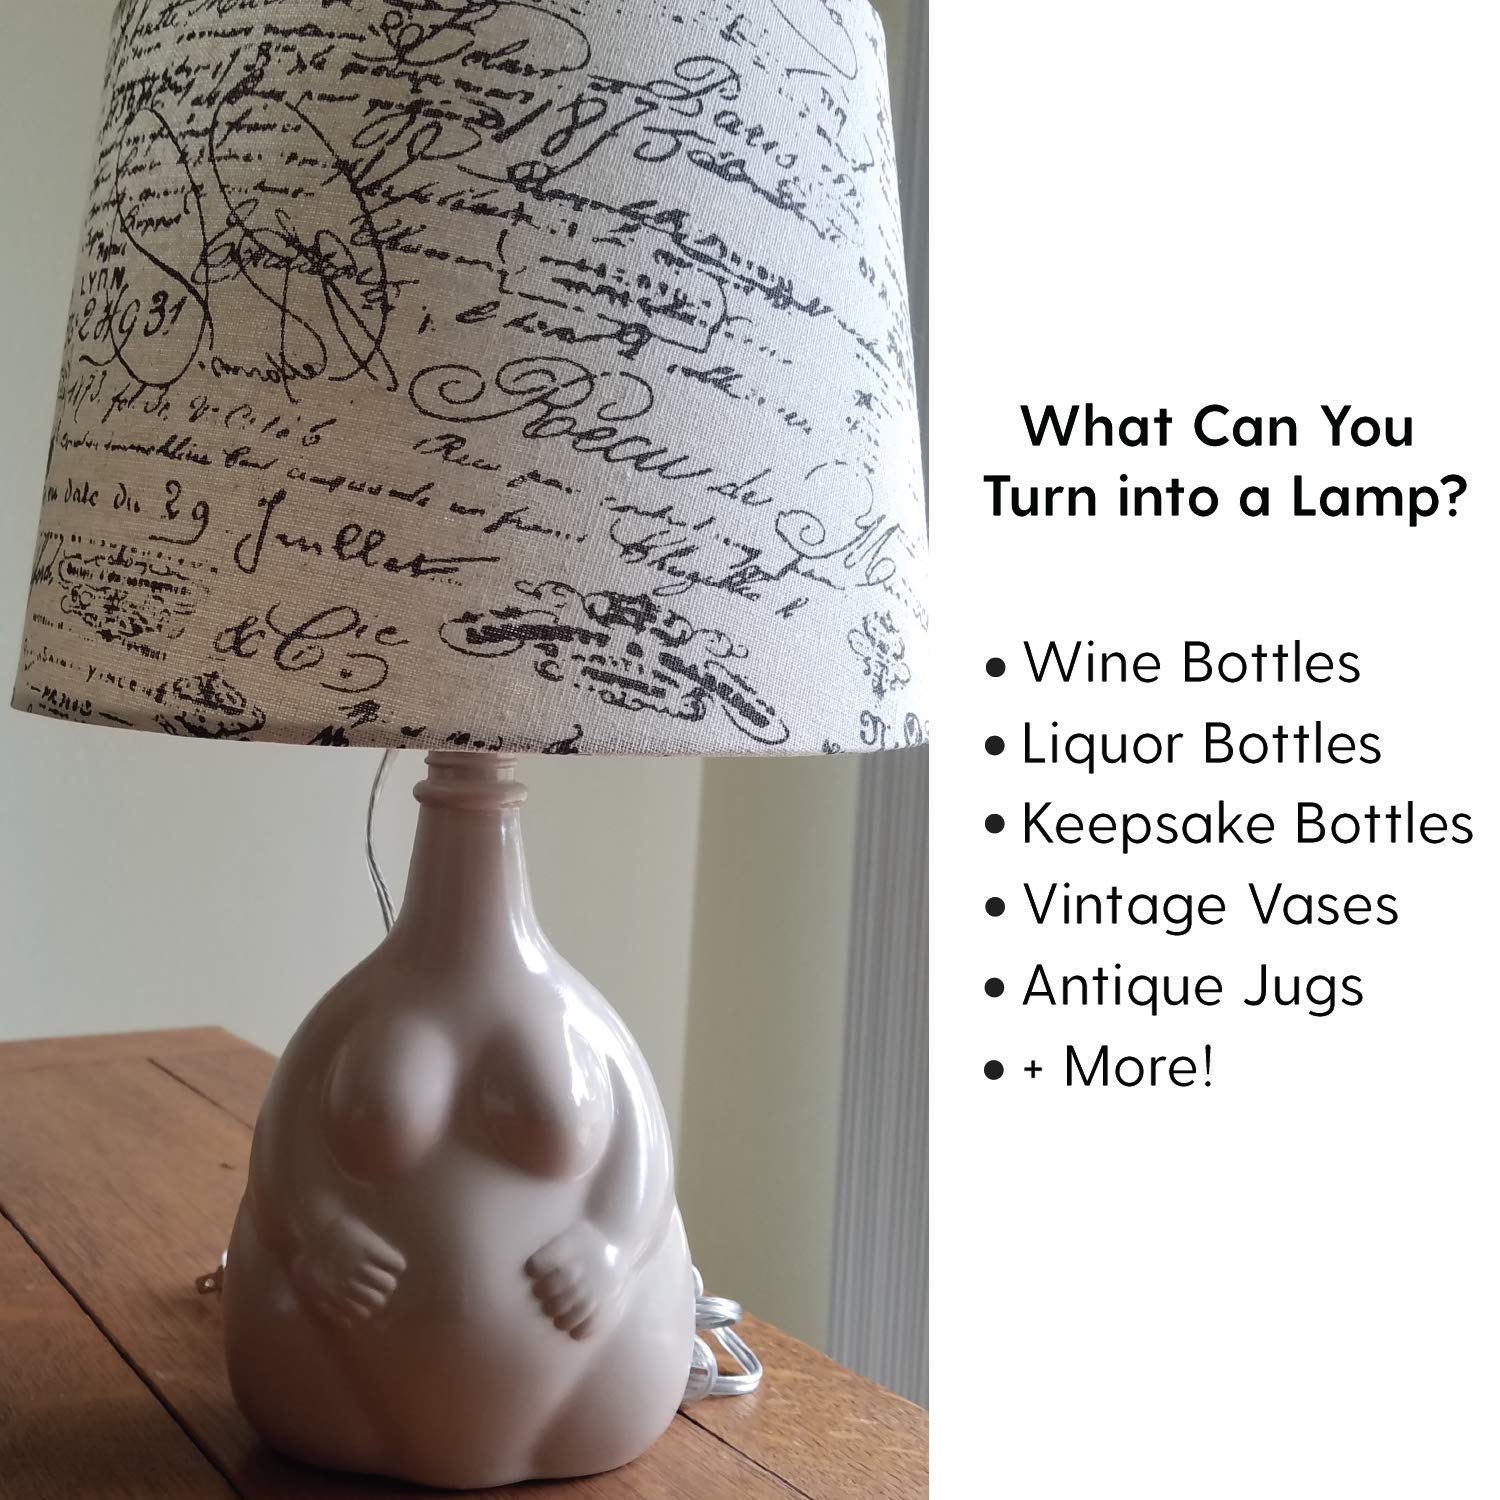 How to Make a Lamp Using a DIY Lamp Kit - I Like That Lamp - Makely